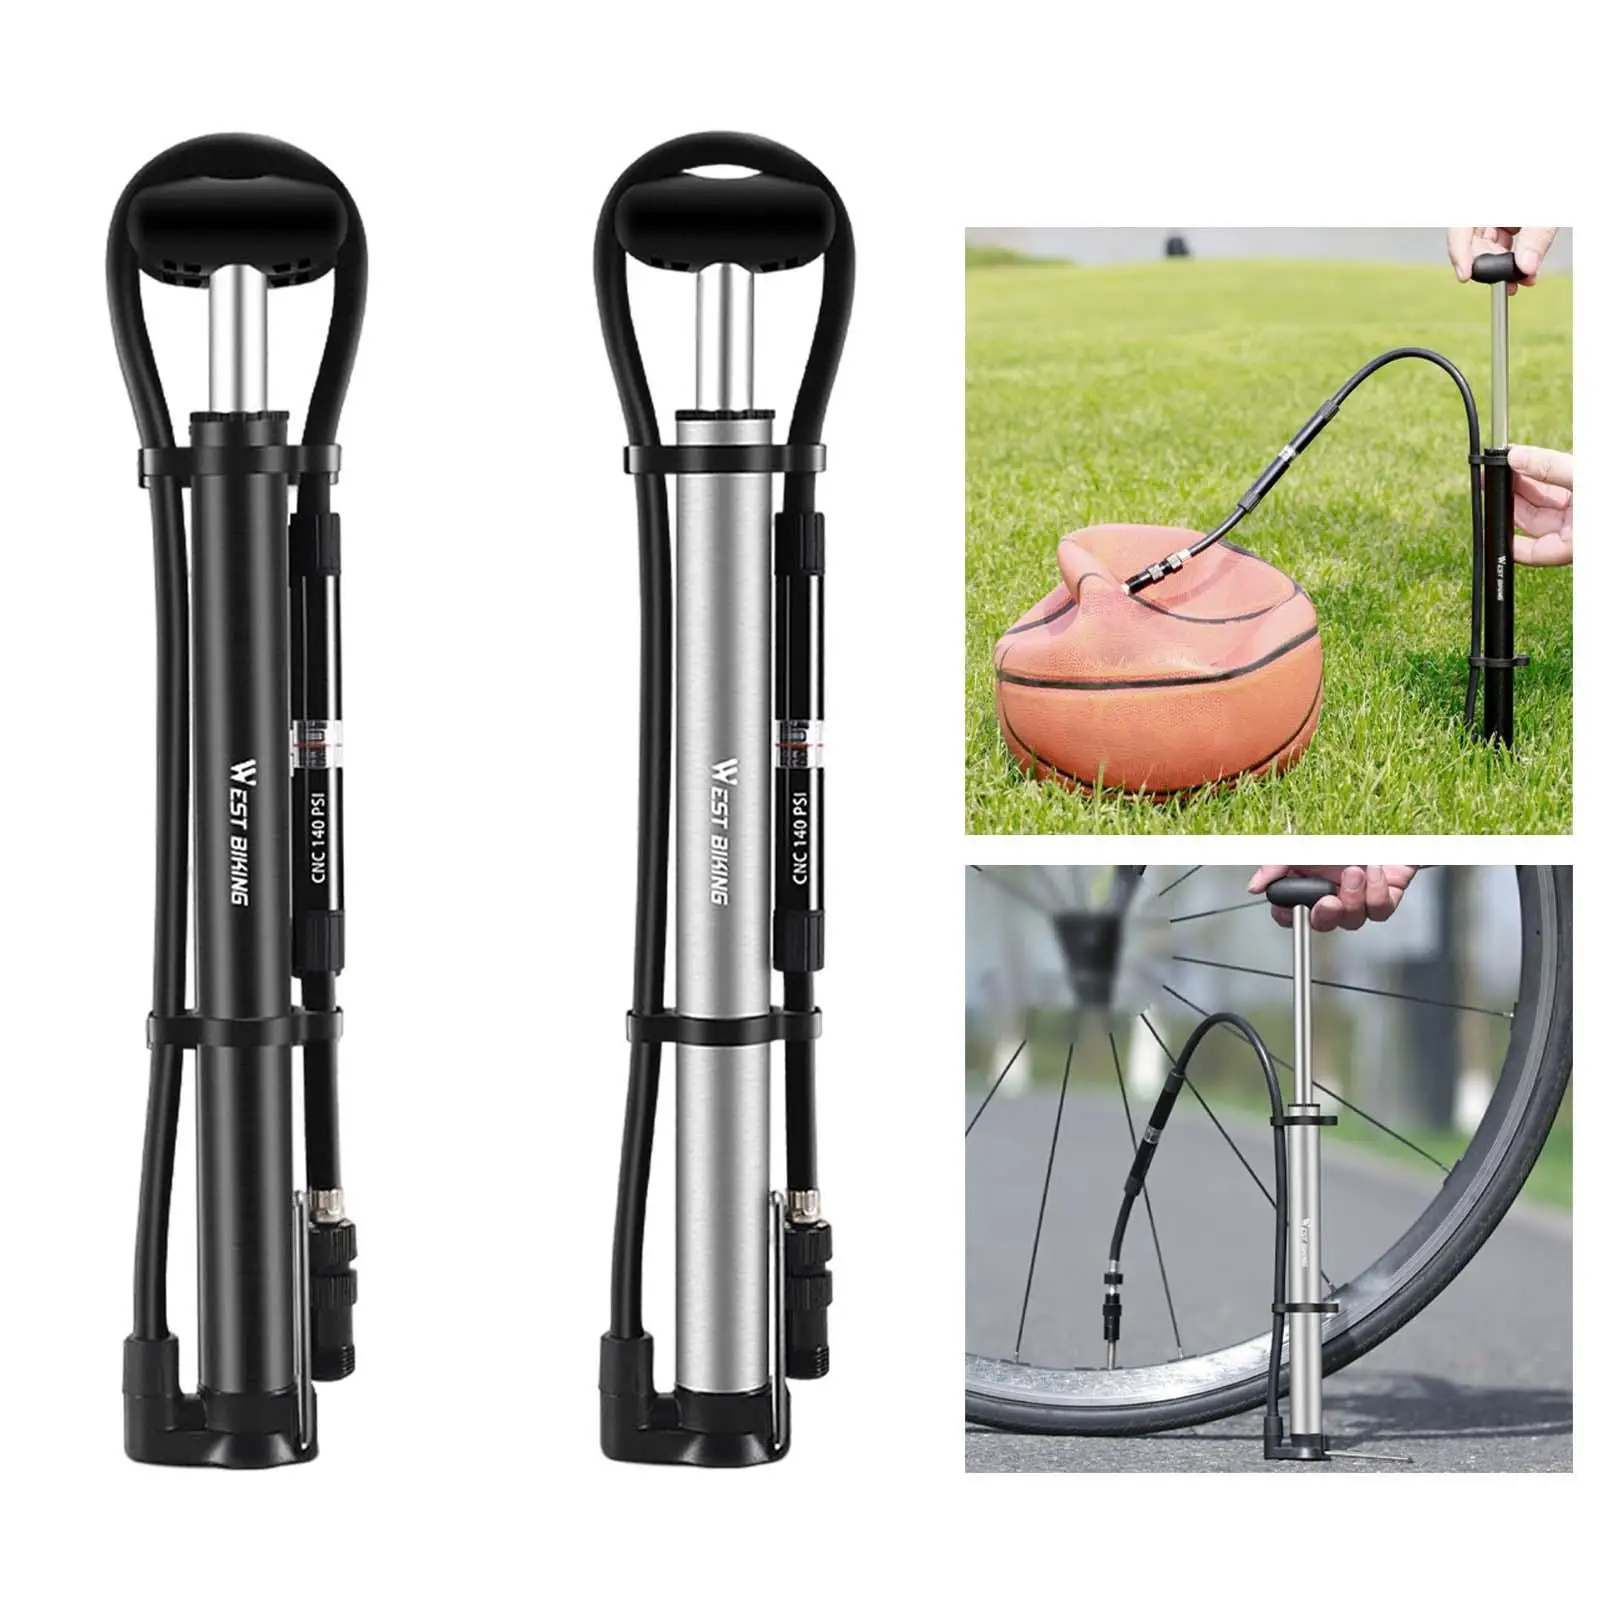 Mini  Pump Cycling Tools Cycling Pump 140PSI Tire Inflator High Pressure with Pressure  for Mountain Bikes Road BMX Bikes